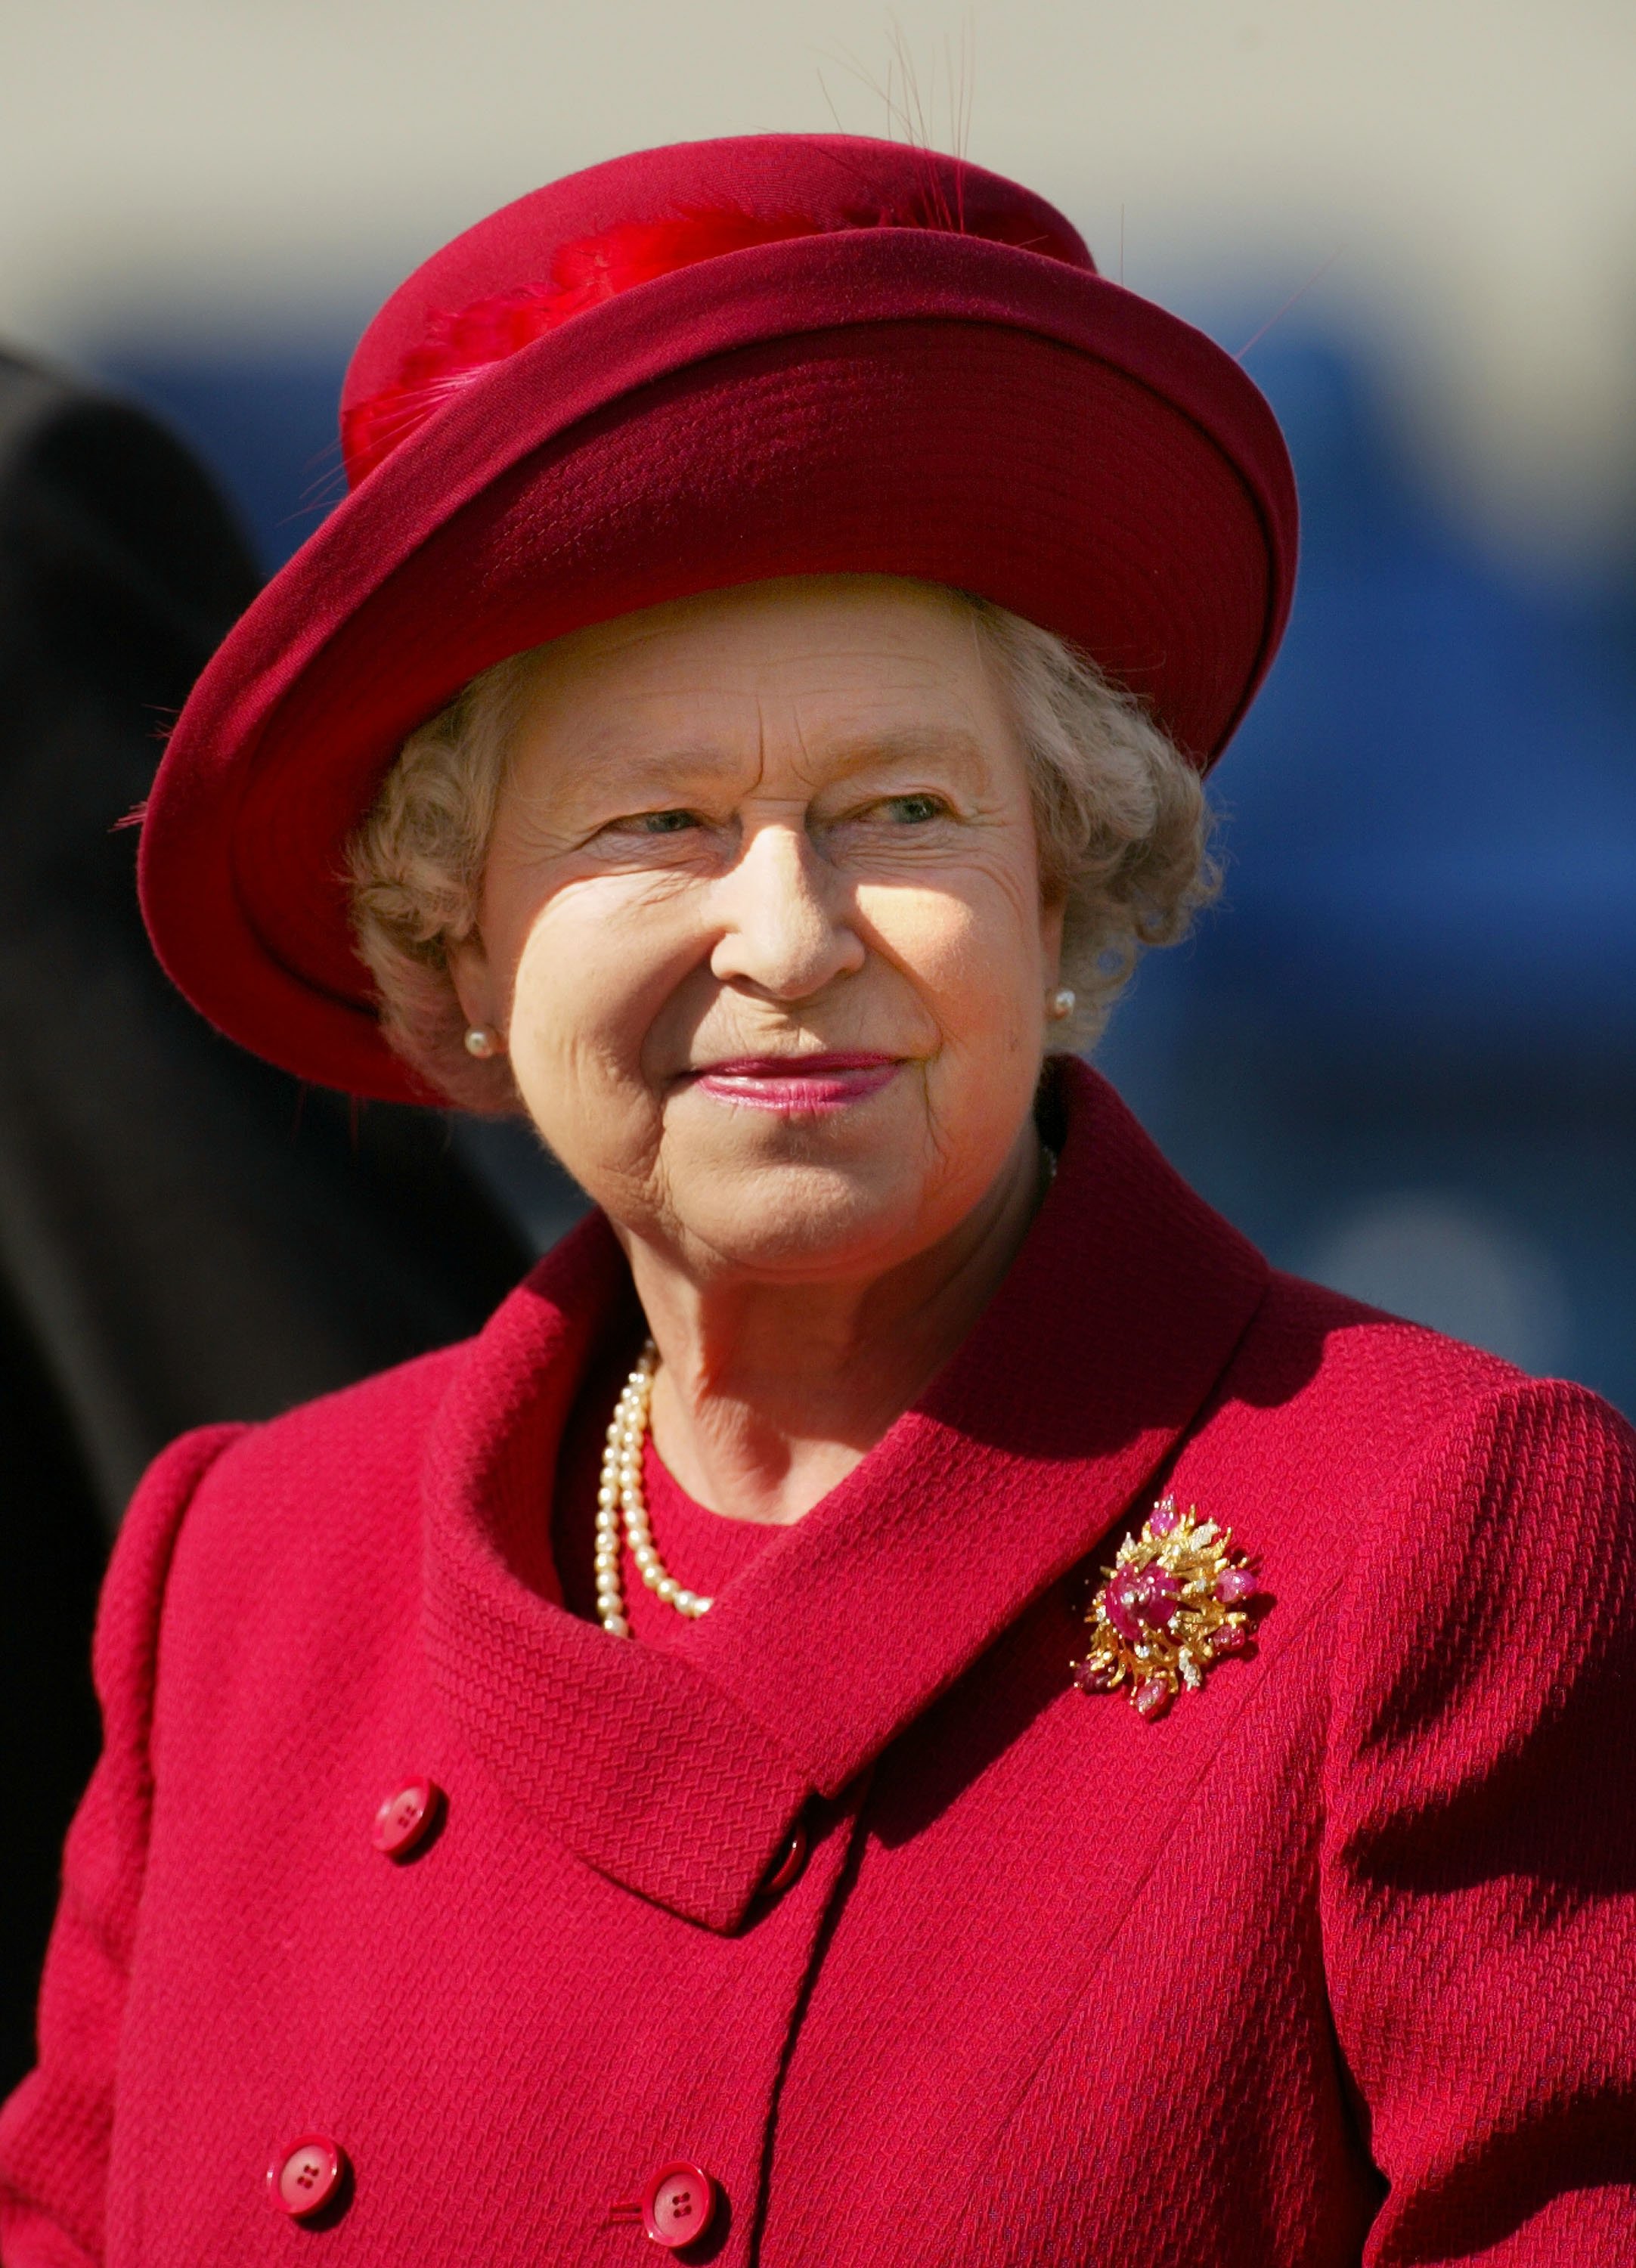 Queen Elizabeth at The Royal Windsor Horse Show at Windsor In May 18, 2002, Great Park, England | Photo: Getty Images